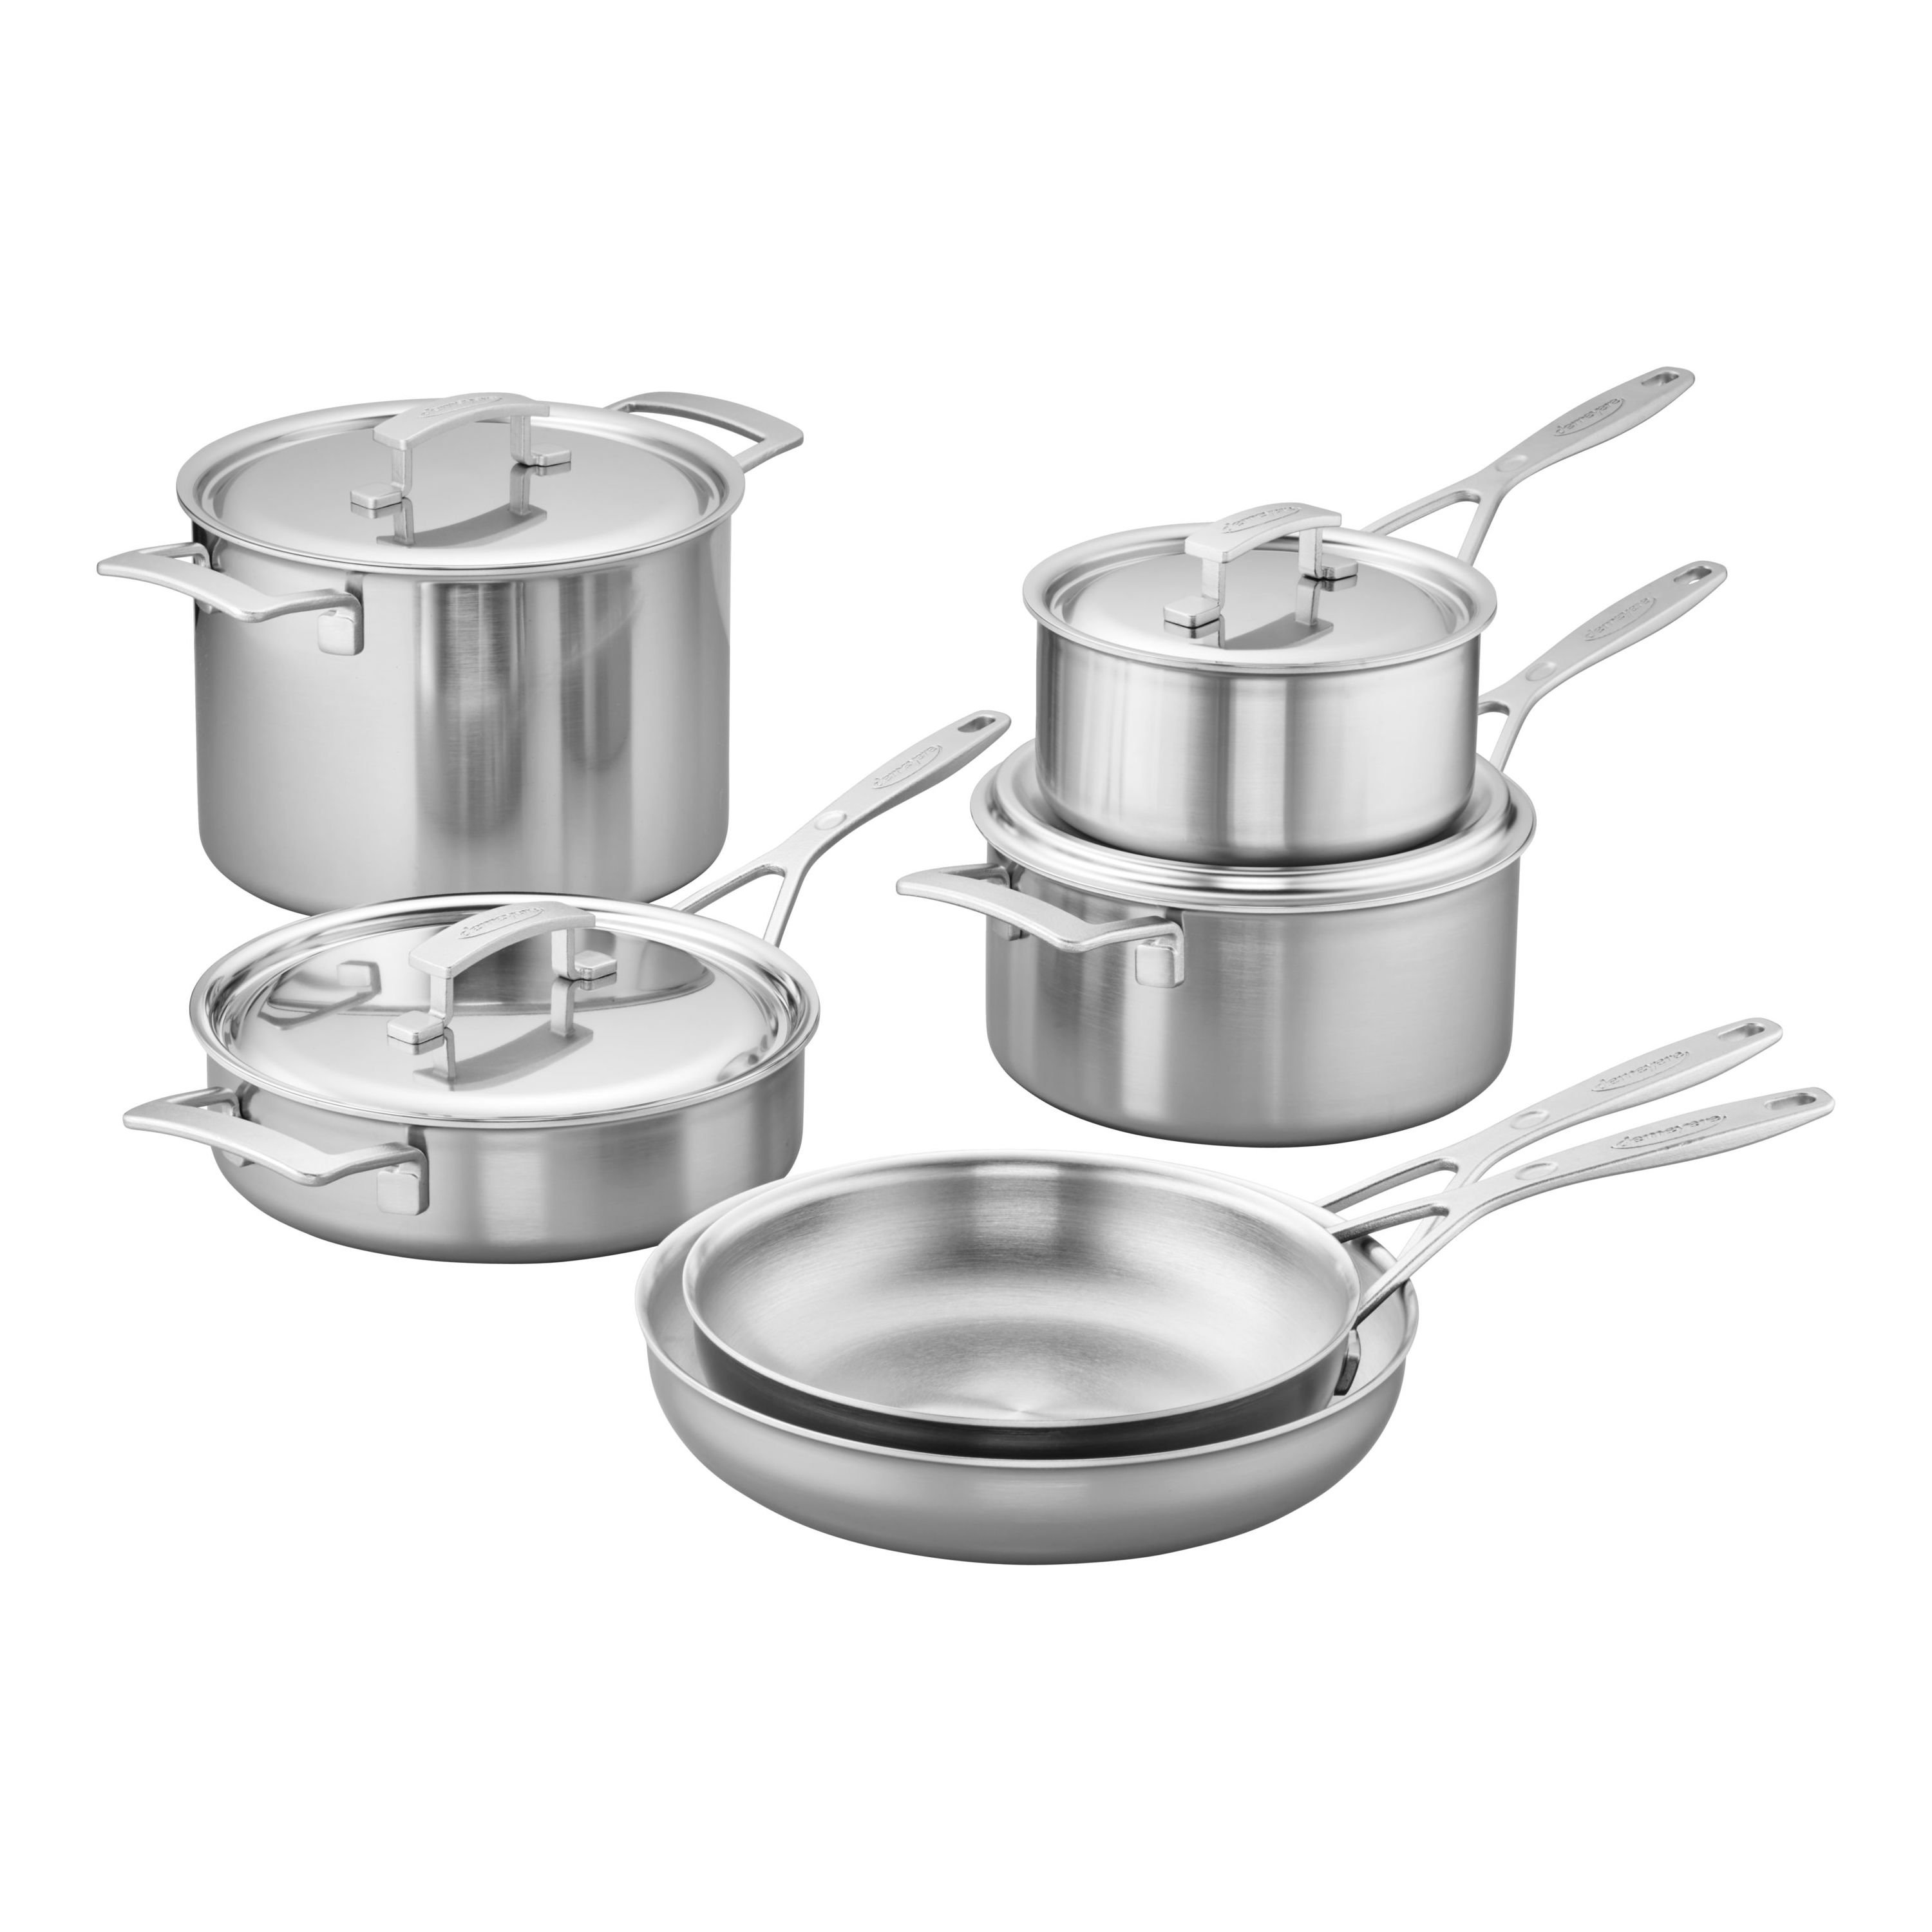 Nickel Free Stainless Steel Pots and Pans Set - Healthy Cookware